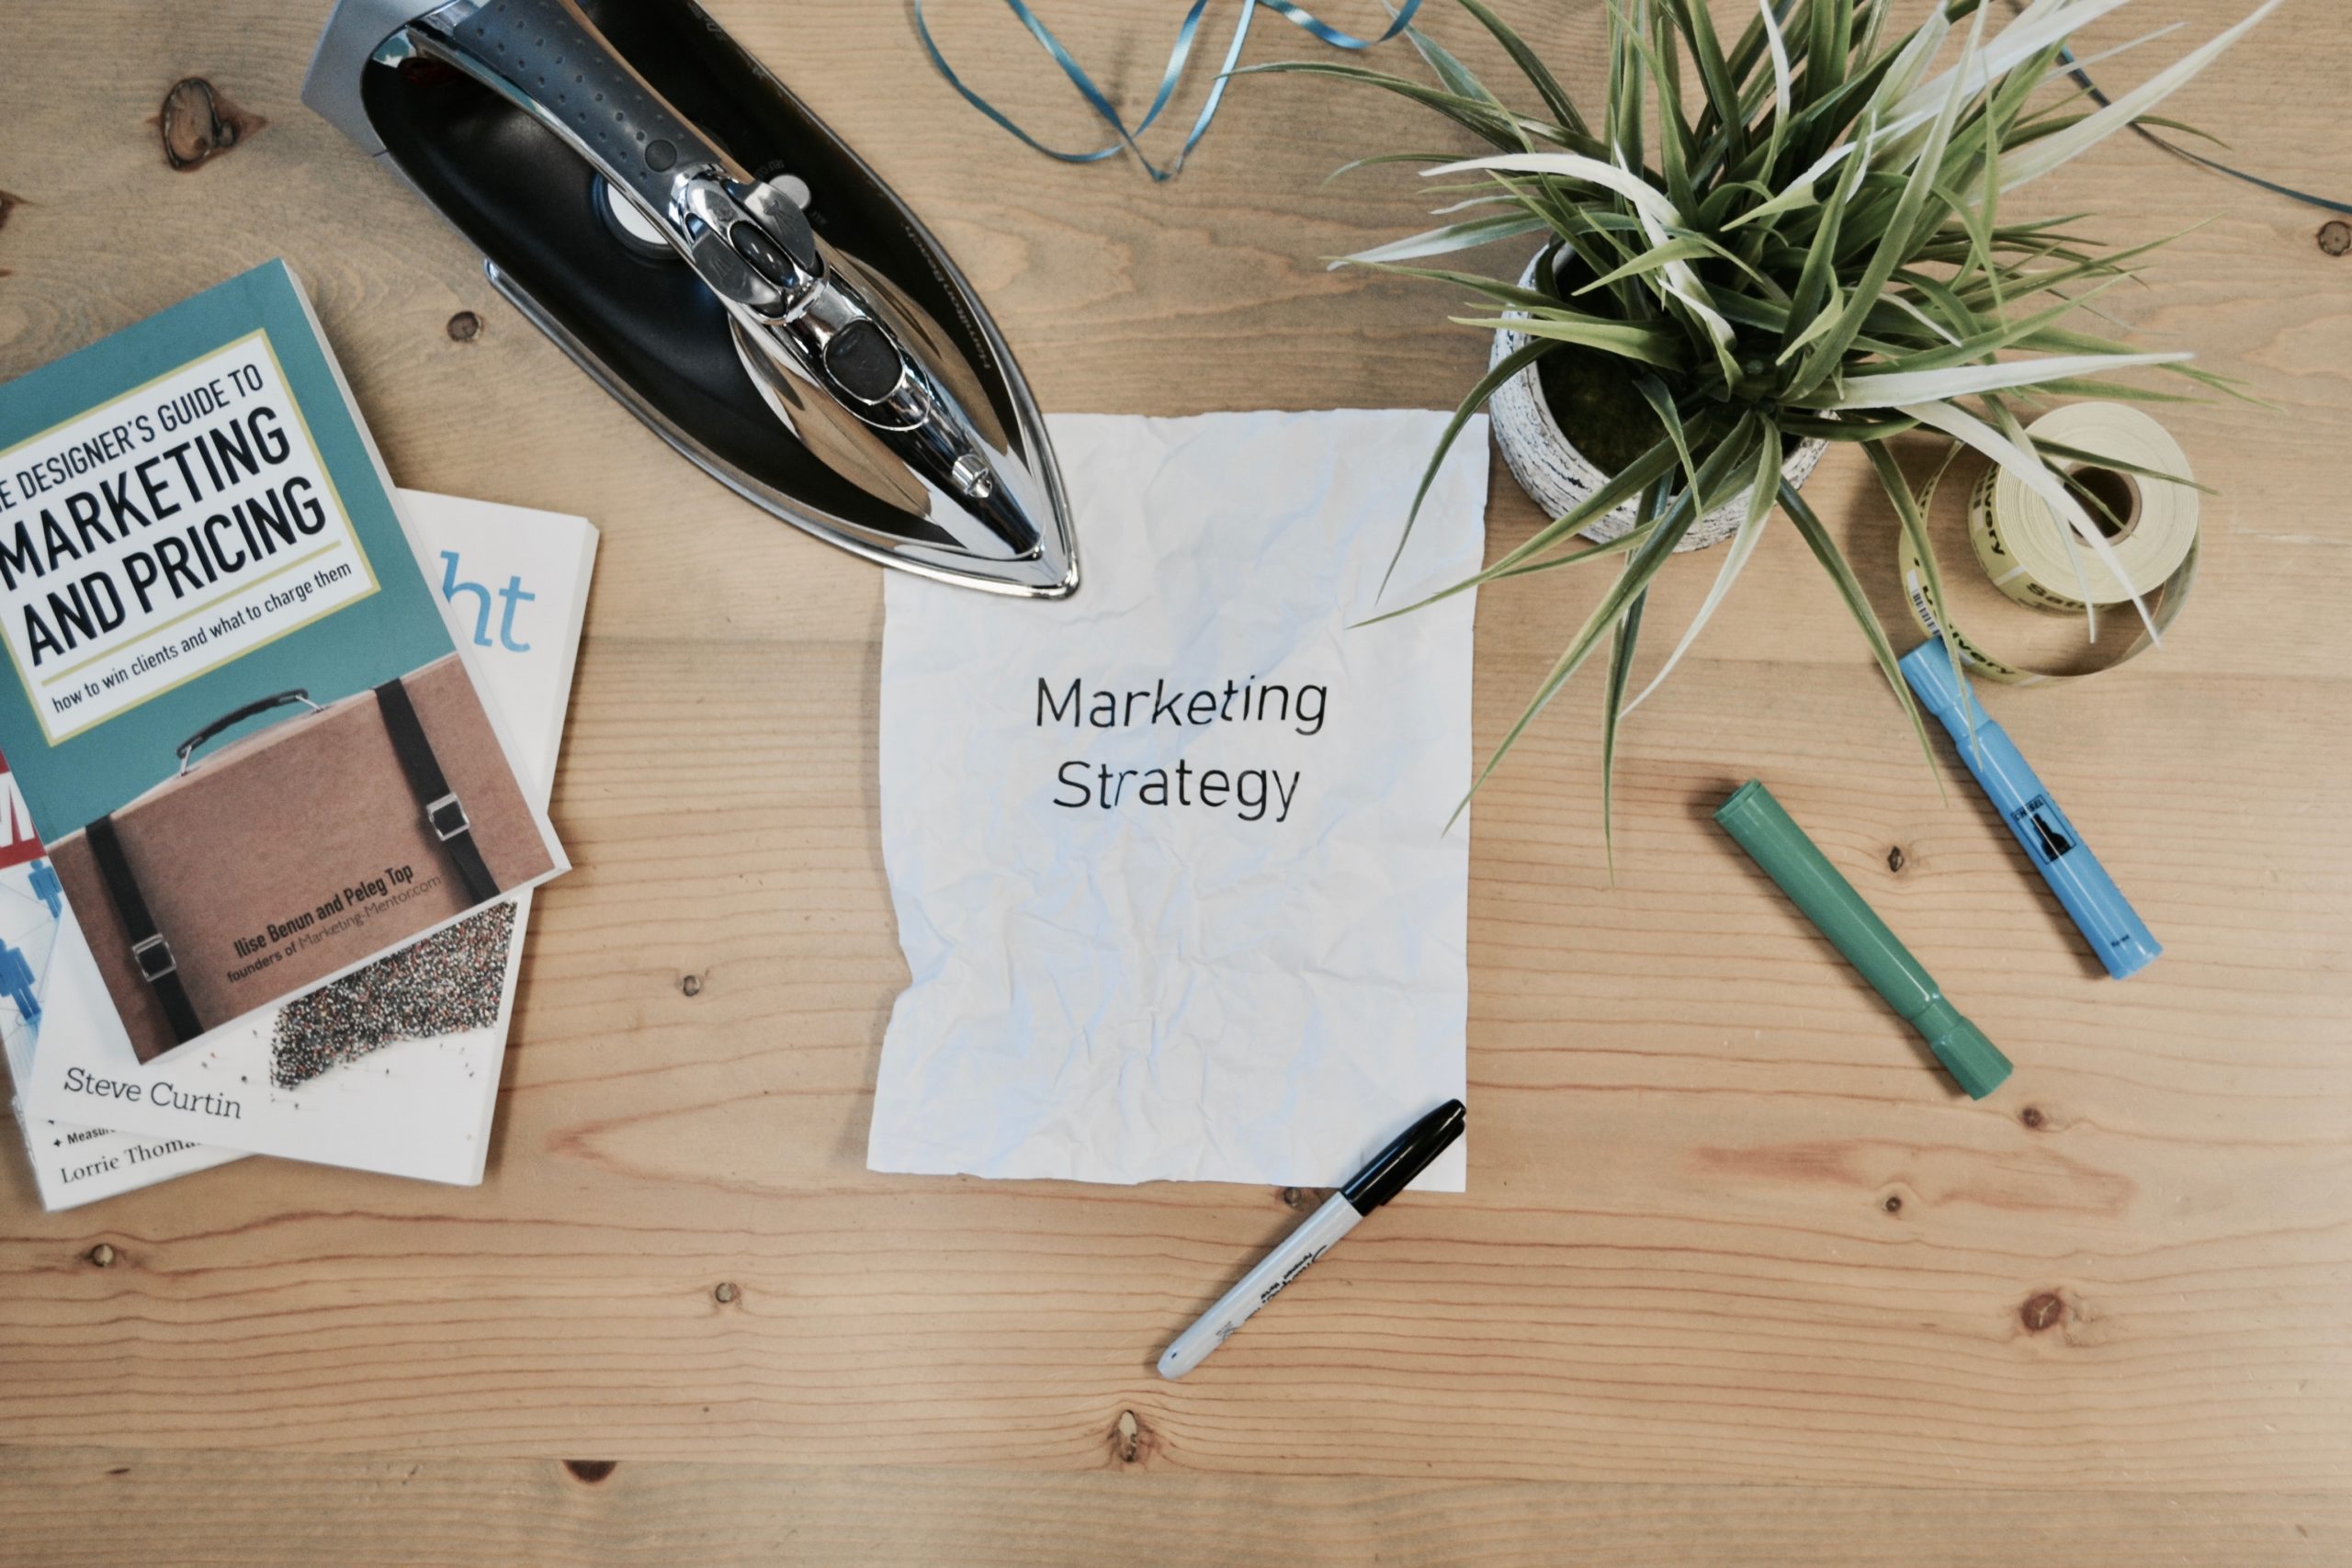 A desk with highlighters, books, a plant, and a crumpled paper with a marketing strategy text